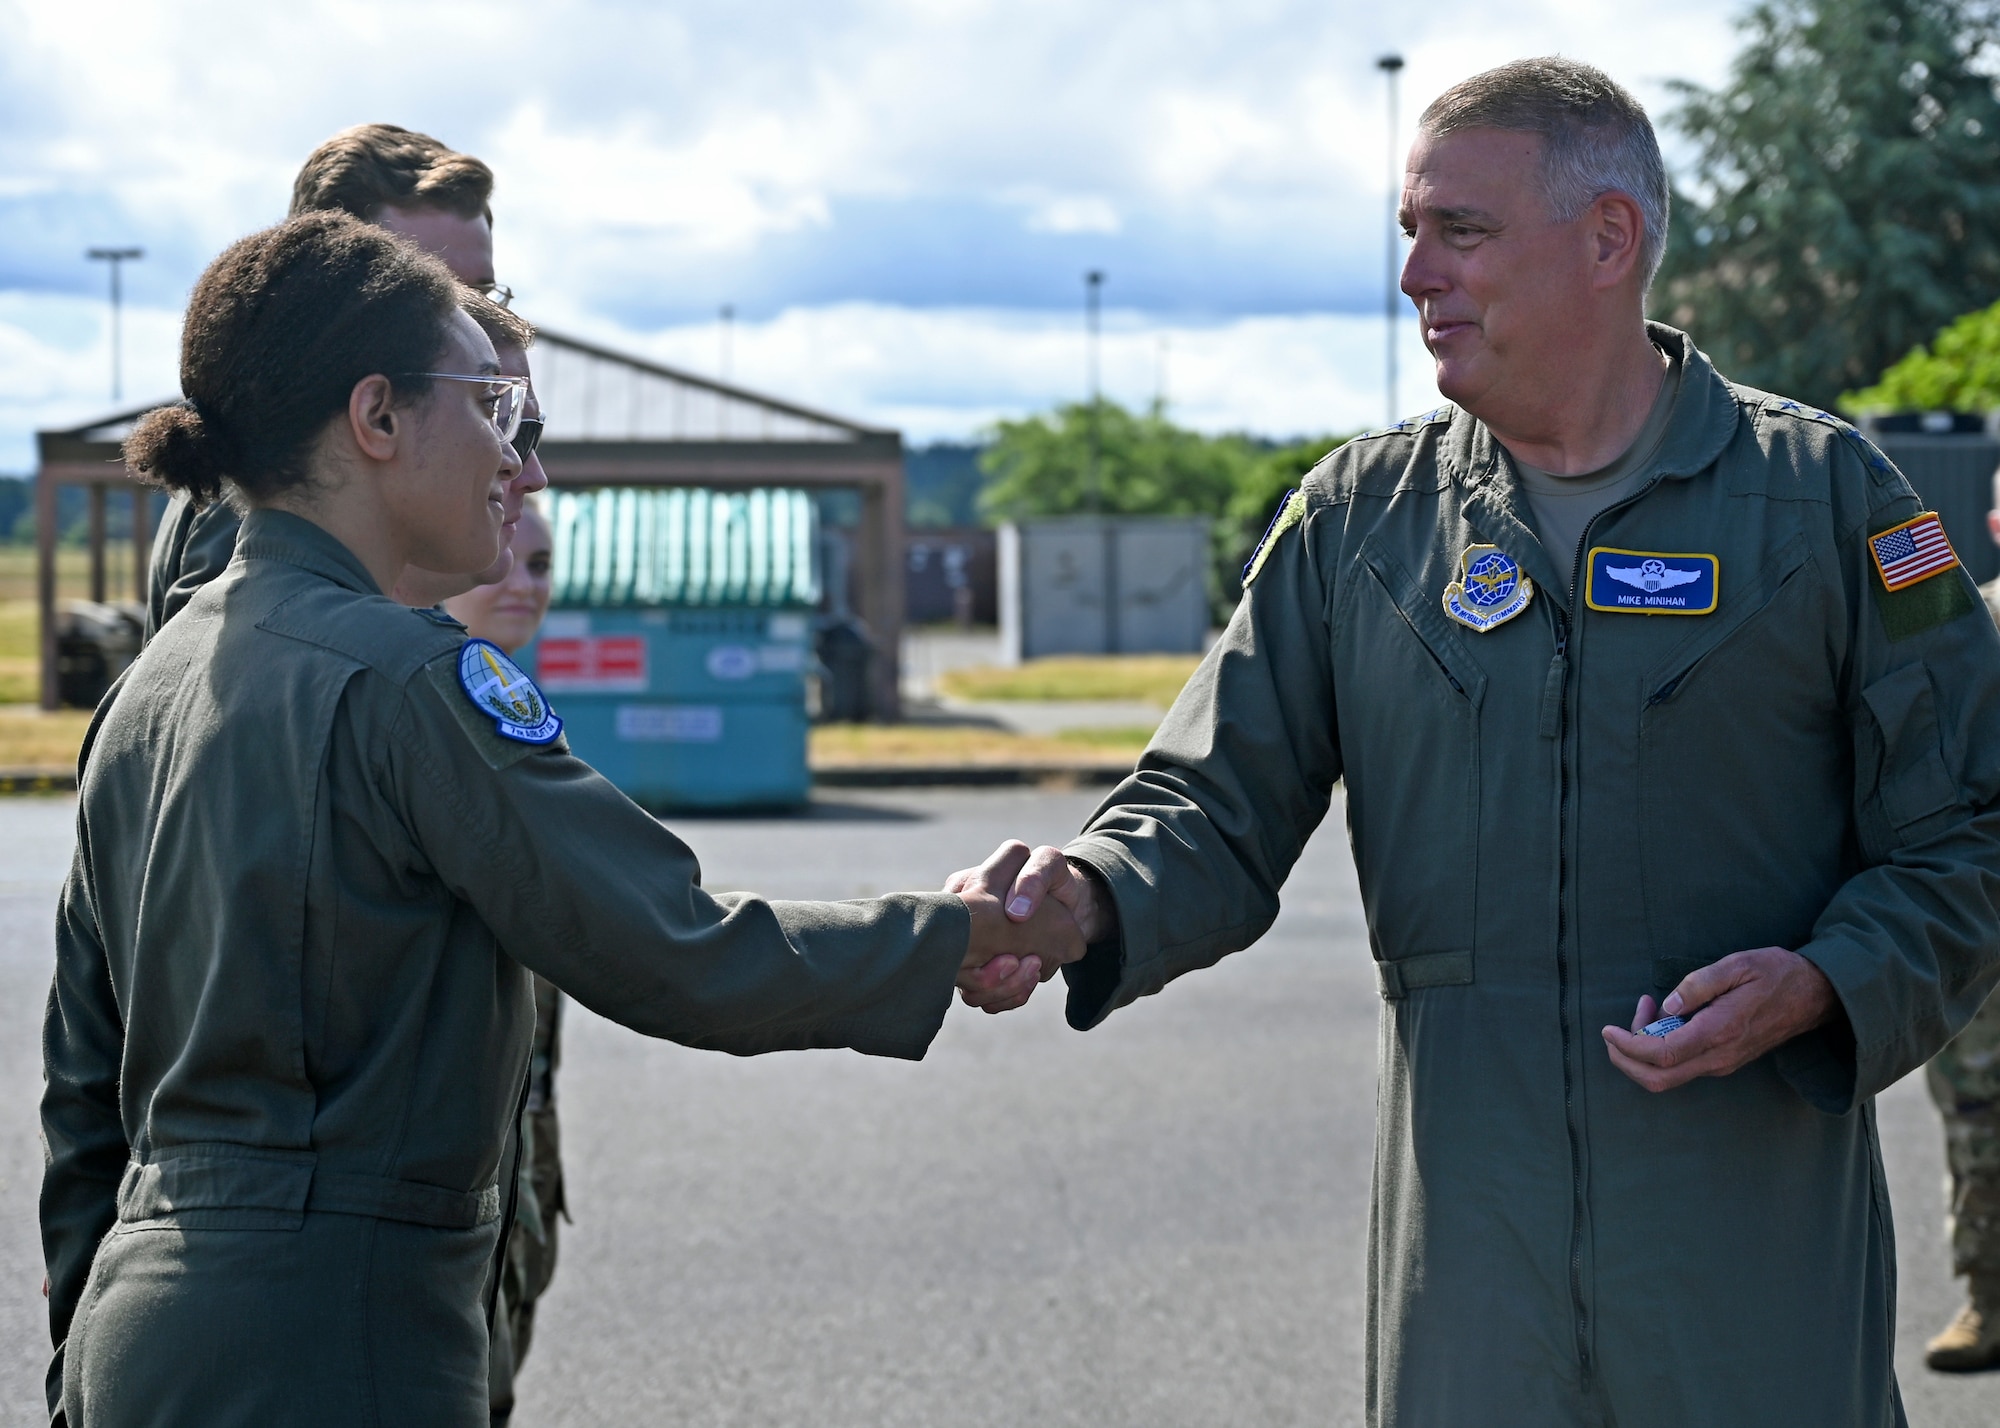 U.S. Air Force Gen. Mike Minihan, Air Mobility Command commander, coins the 2021 AMC Doolittle Award winners during his visit to Joint Base Lewis-McChord, Washington, July 7, 2022. The crew of RCH683 was recognized for their participation in Operation ALLIES REFUGE, which enabled thousands of Afghani’s evacuation from Kabul, Afghanistan, in August 2021. (U.S. Air Force photo by Senior Airman Callie Norton)